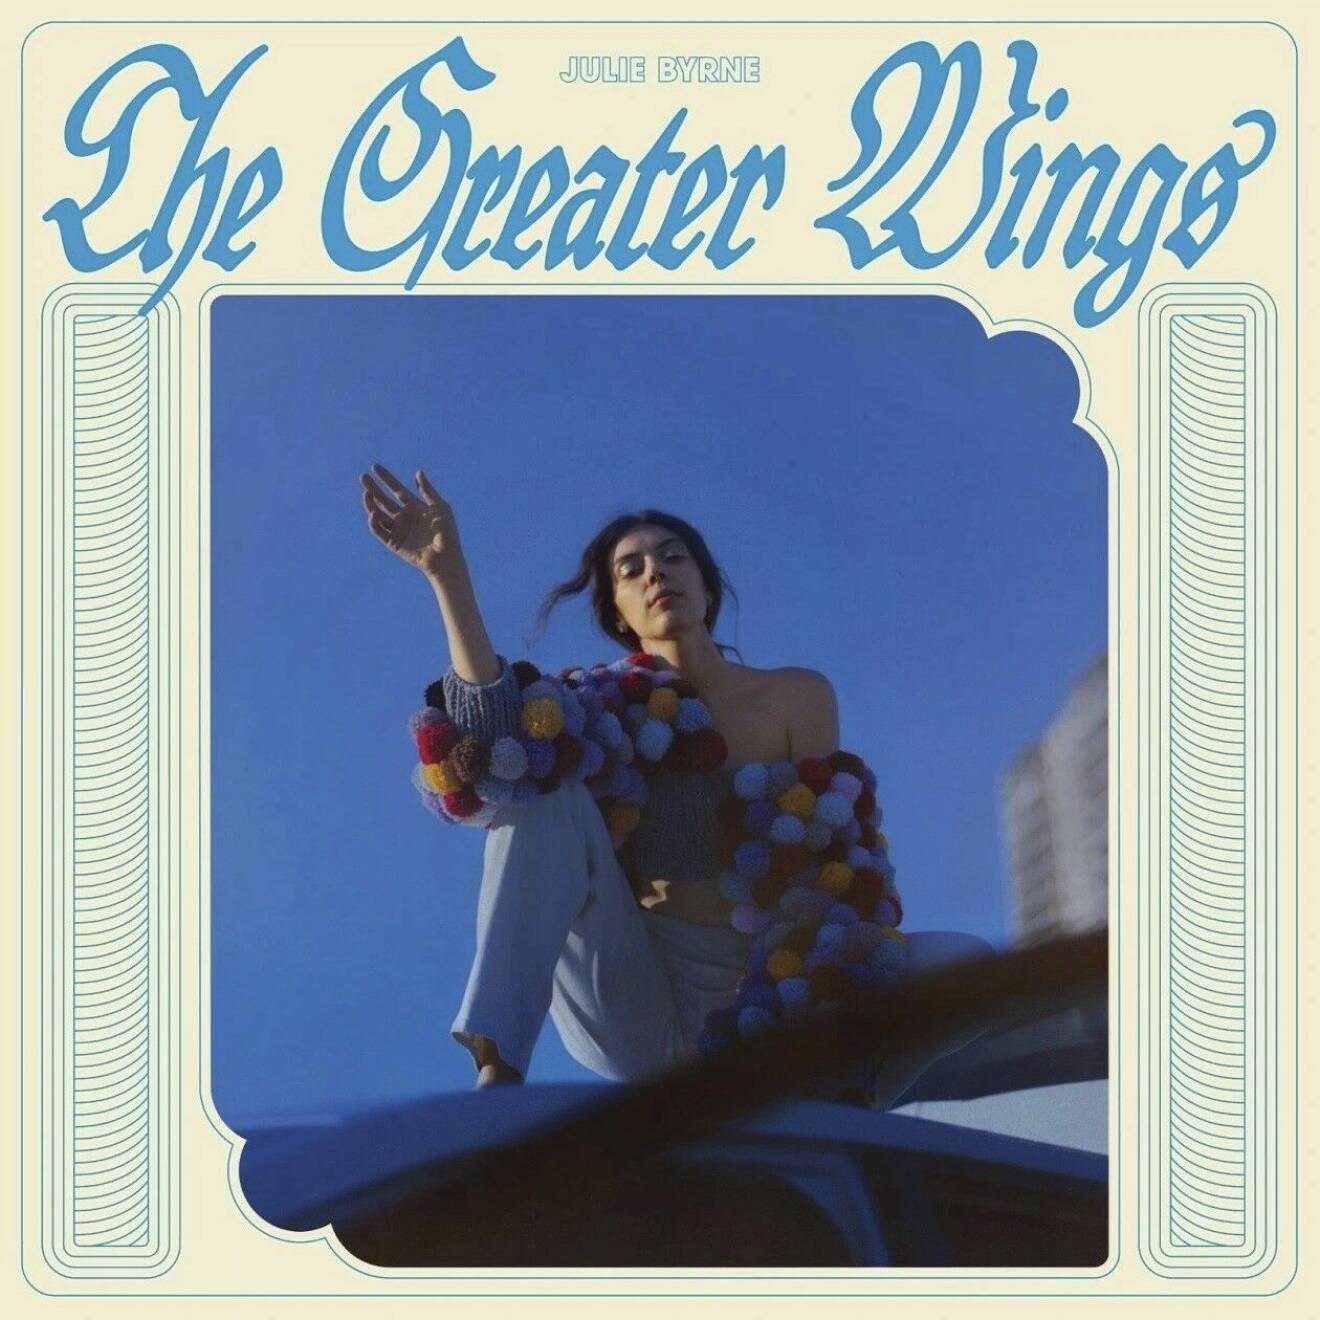 Julie Byrne The Greater Wings.